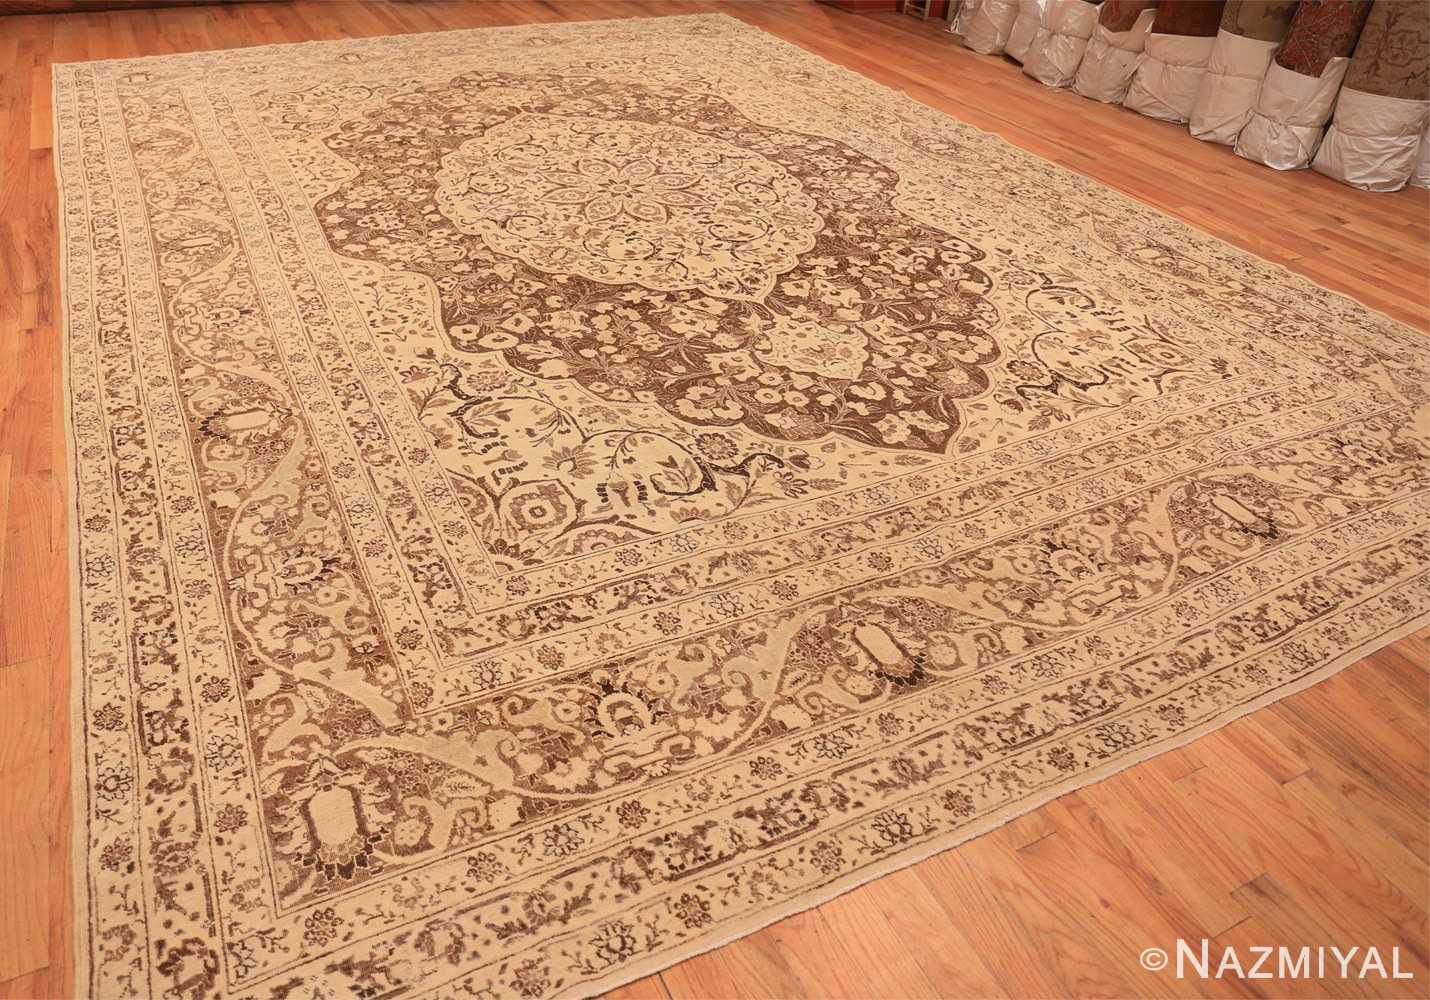 Full Brown background Large Antique Persian Tabriz rug 50450 by Nazmiyal Antique Rugs